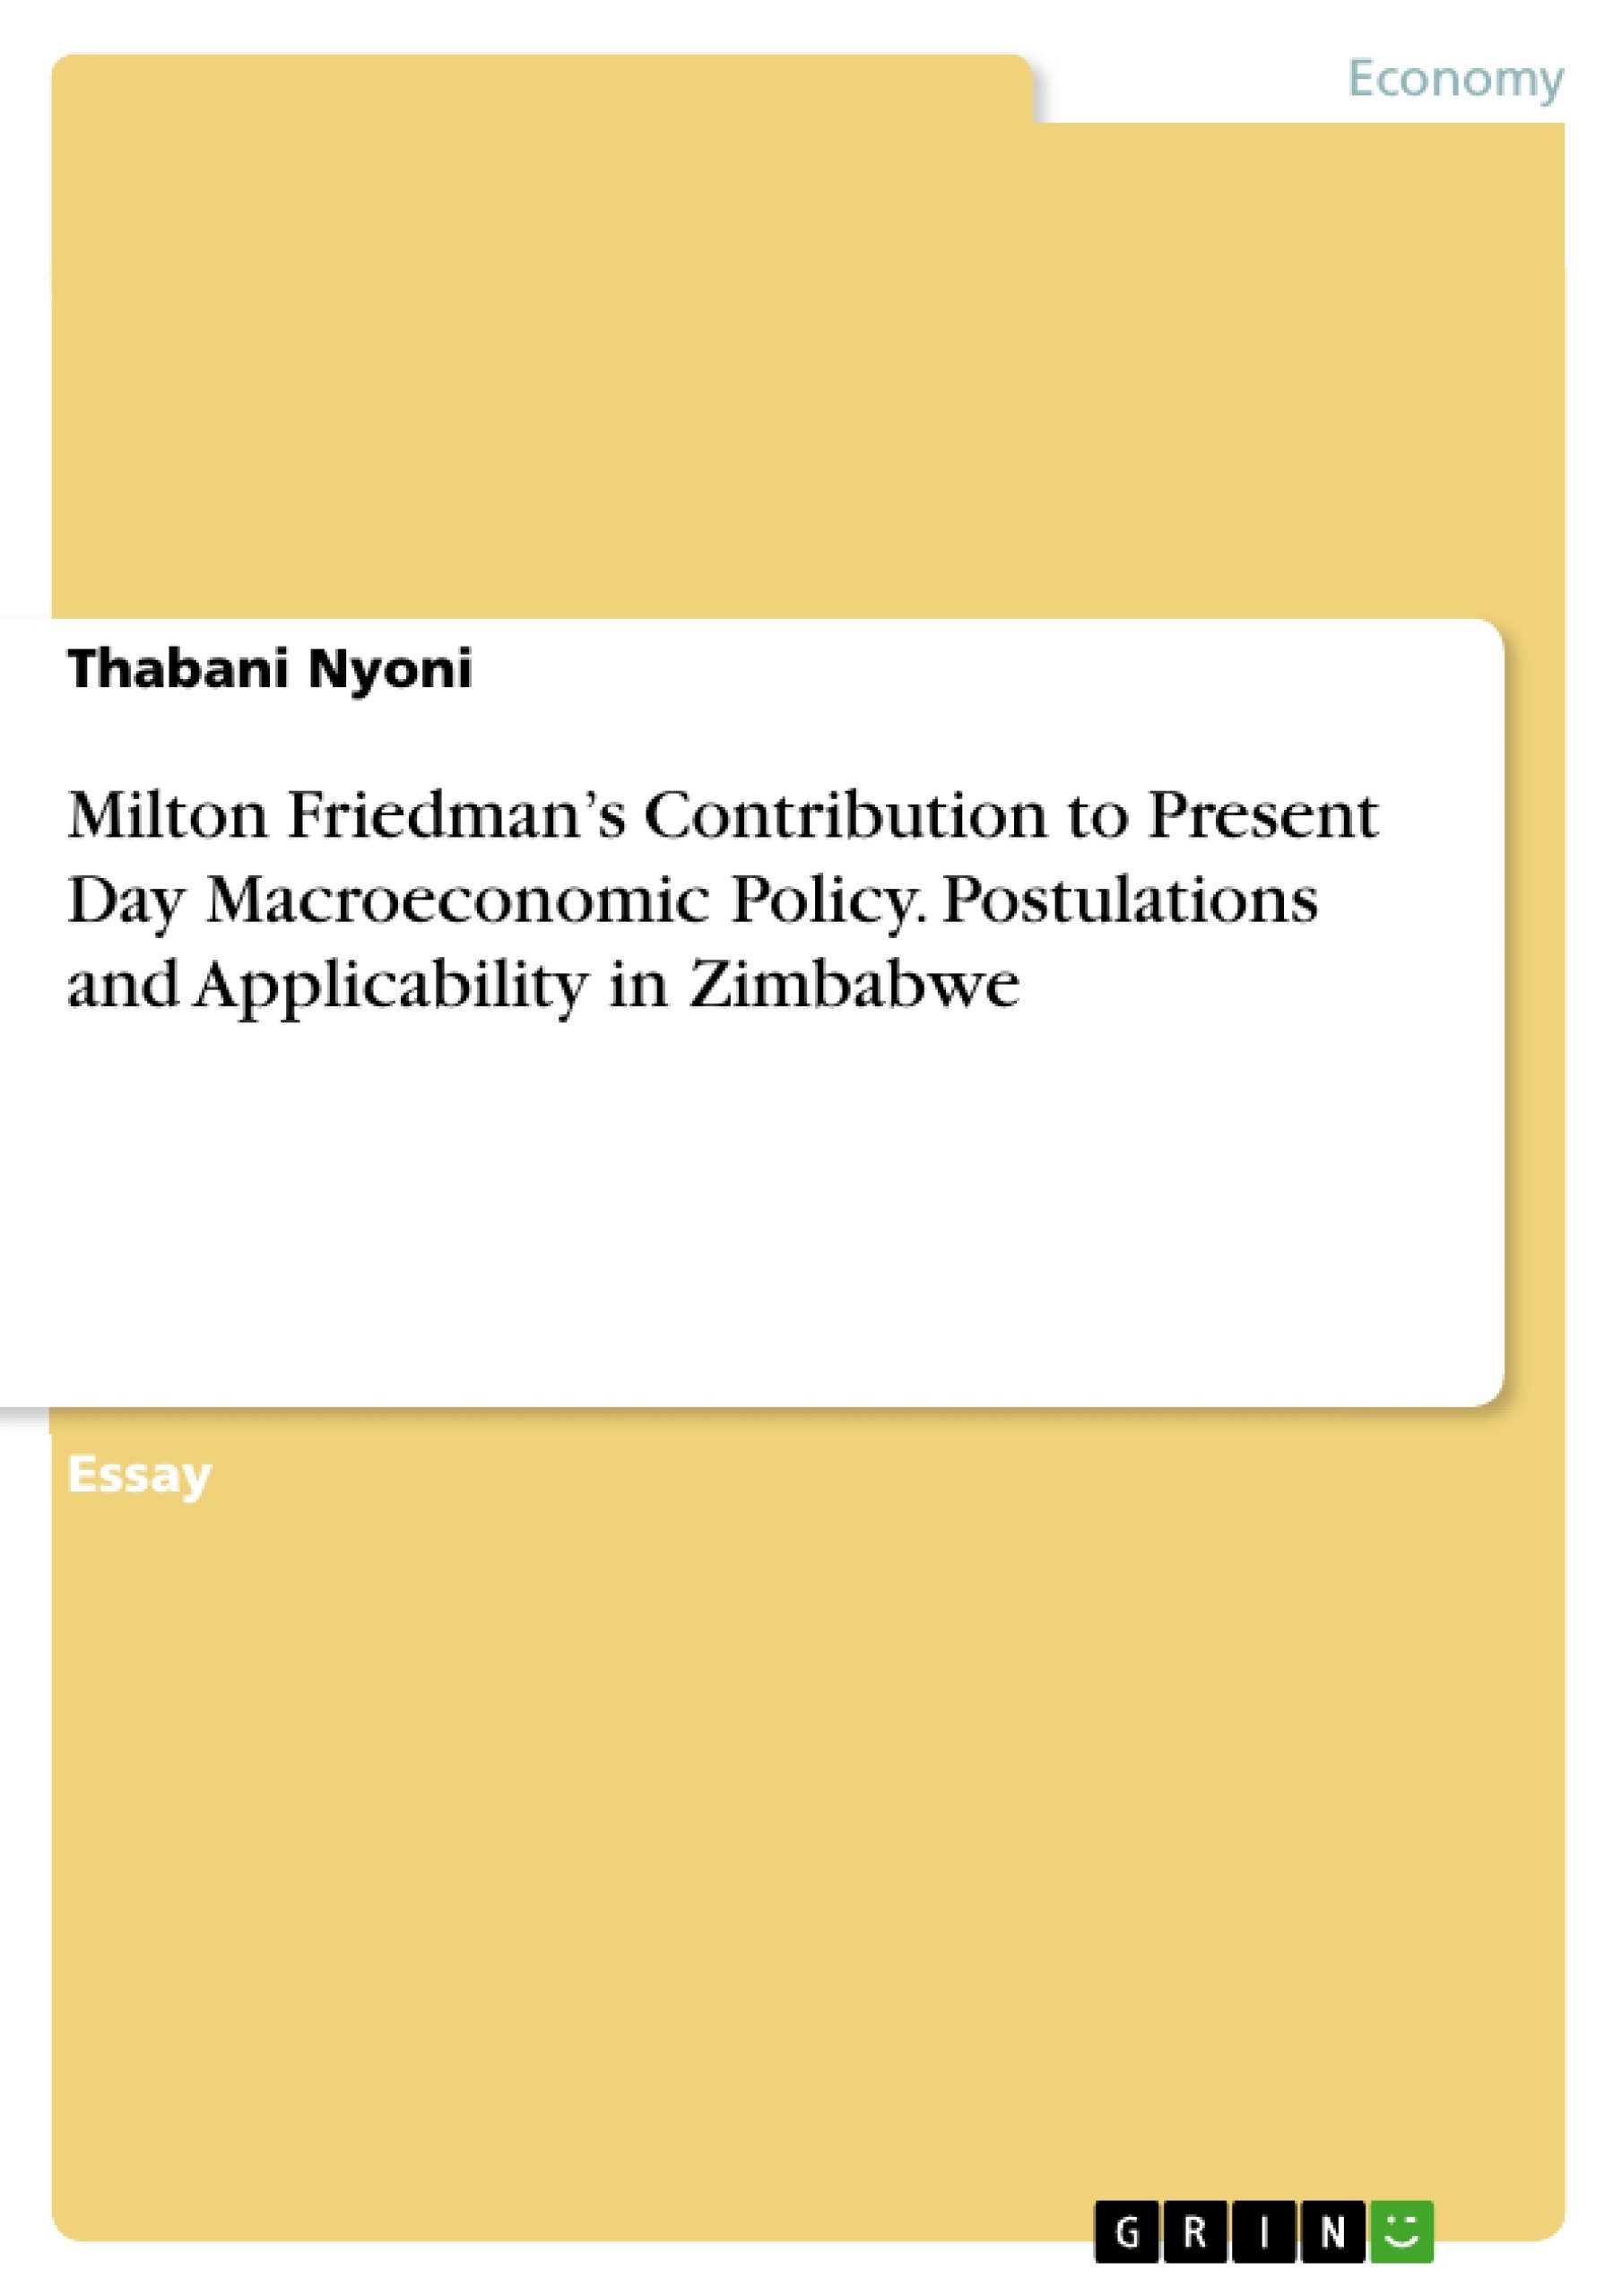 Title: Milton Friedman’s Contribution to Present Day Macroeconomic Policy. Postulations and Applicability in Zimbabwe